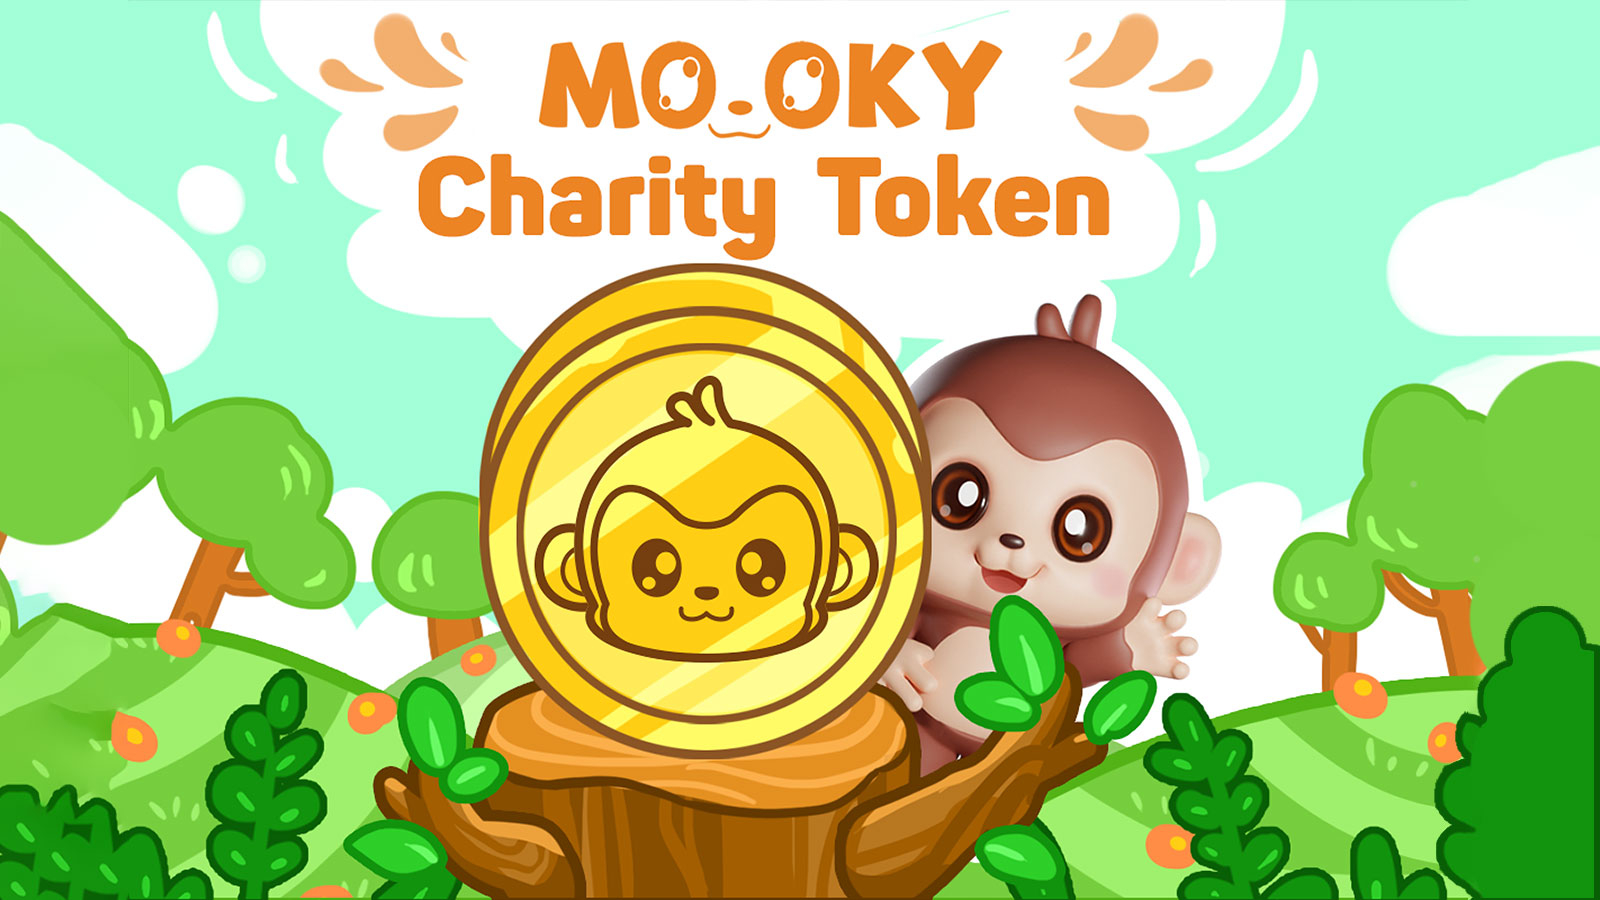 Charity Token Project Mooky (Mooky) Presale Expected to Attract New Investors